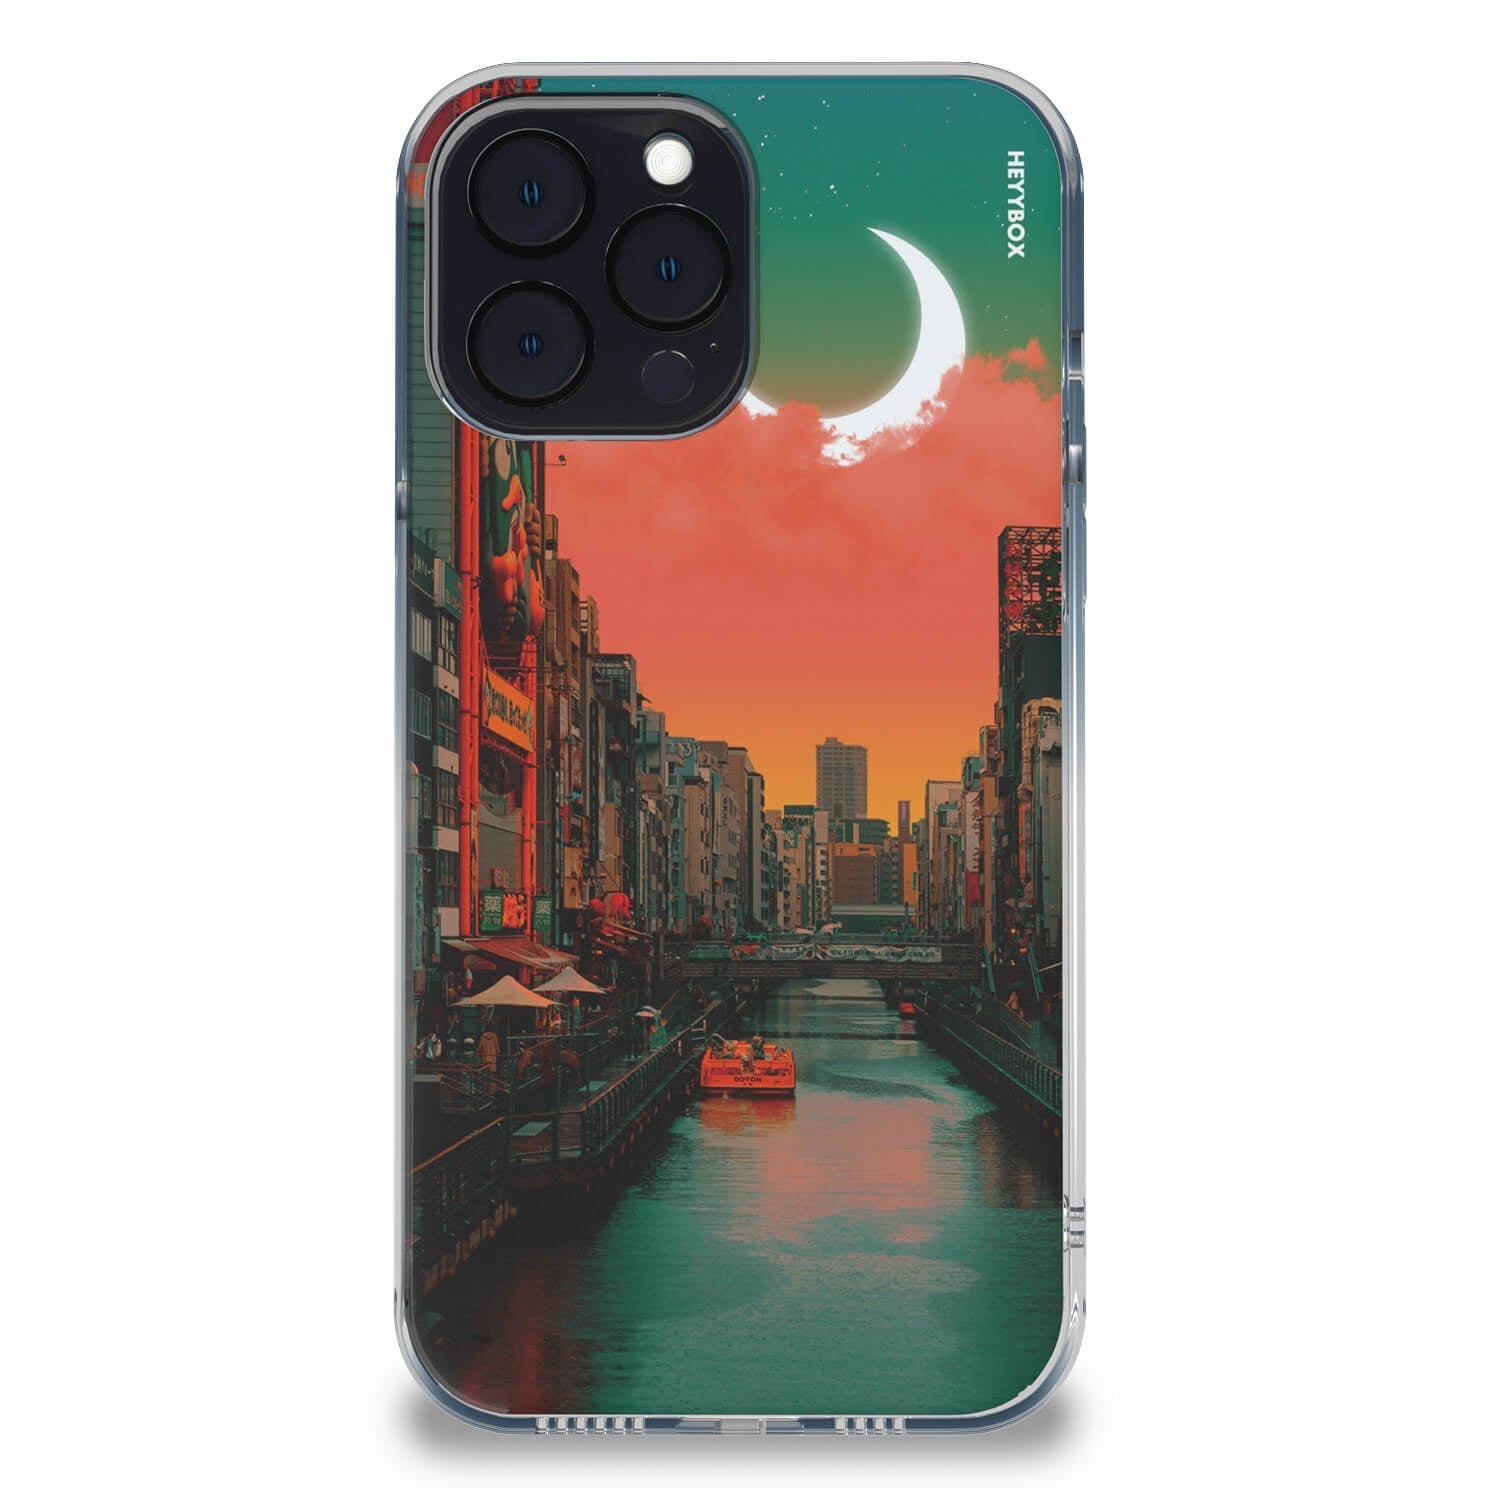 Low Night RGB Case for iPhone